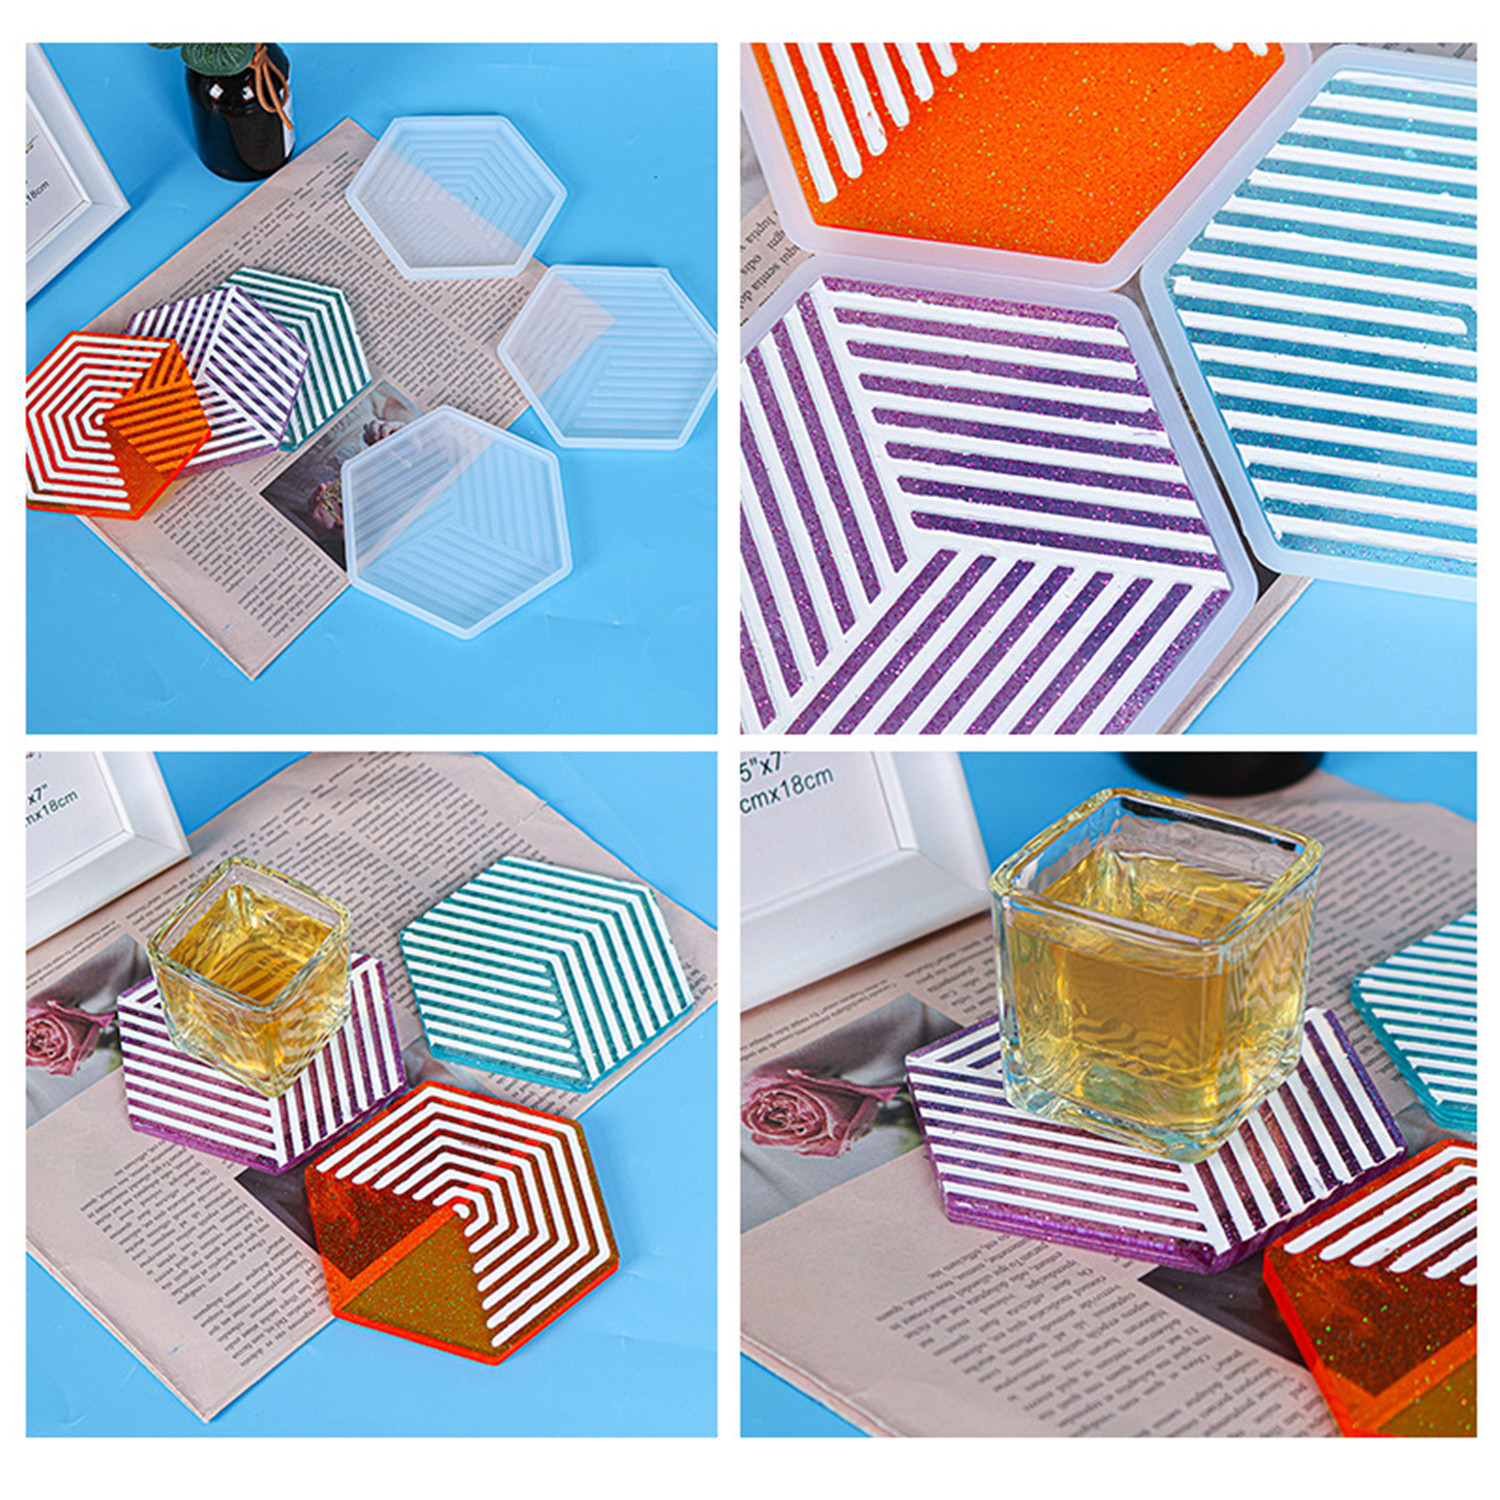 HONEYDEWD Handmade Resin Moulds Casting Silicone Tray Mould Geometric Stripe Tea Tray Coasters